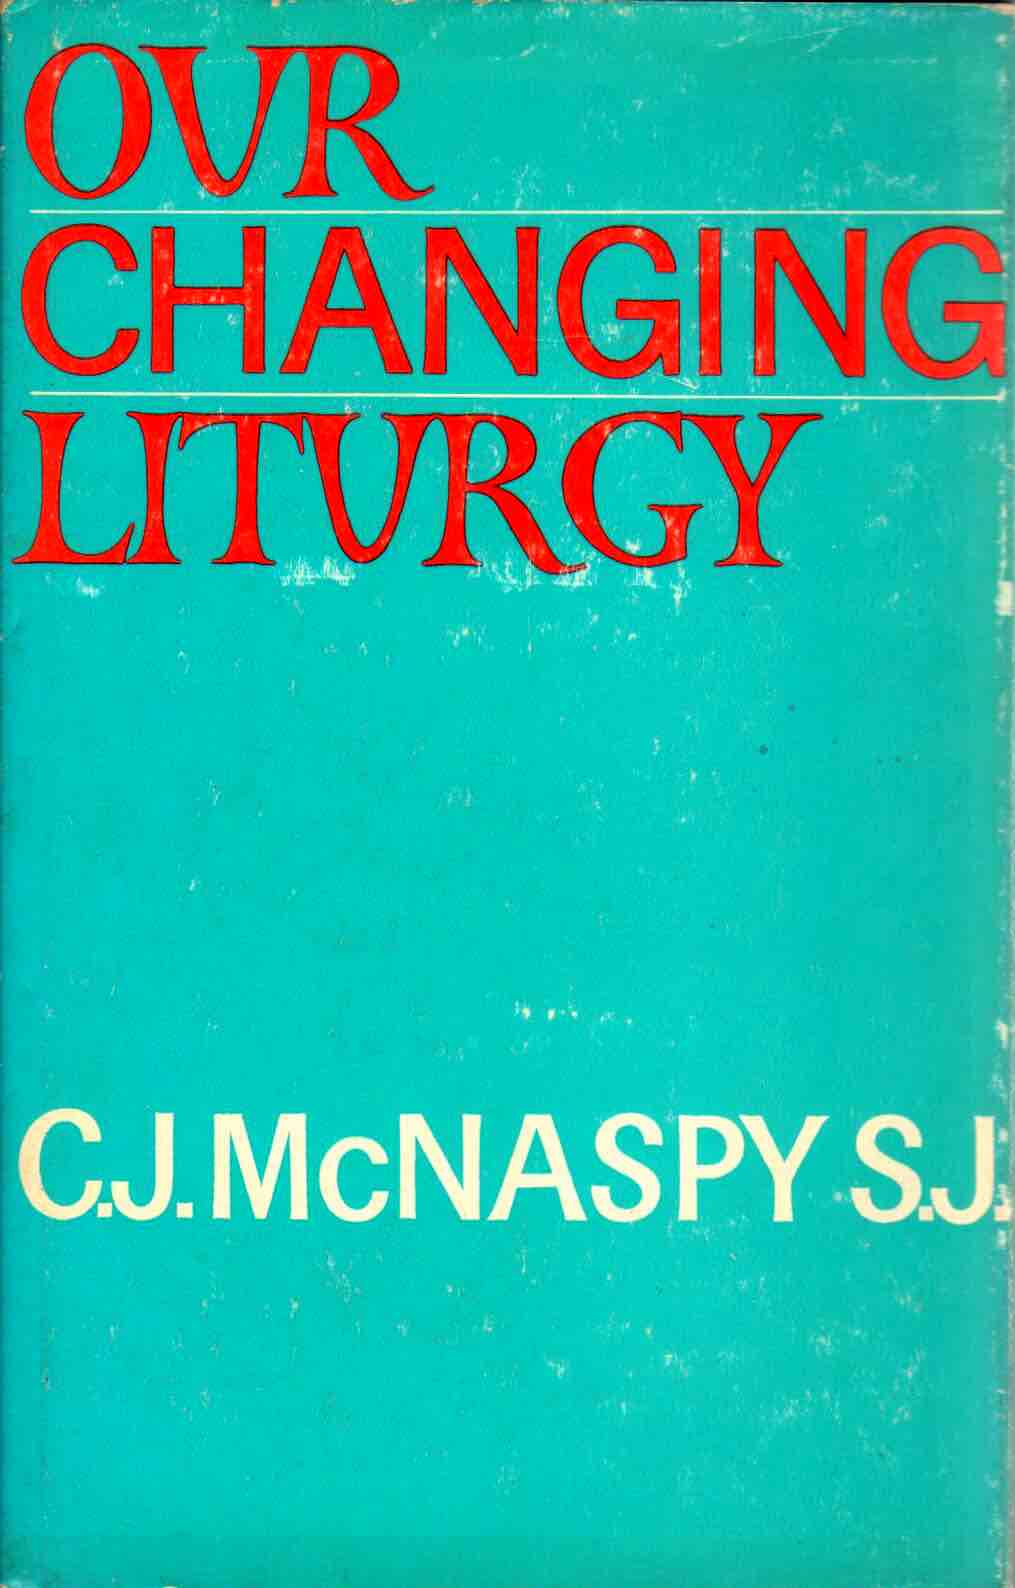 Cover of Our Changing Liturgy